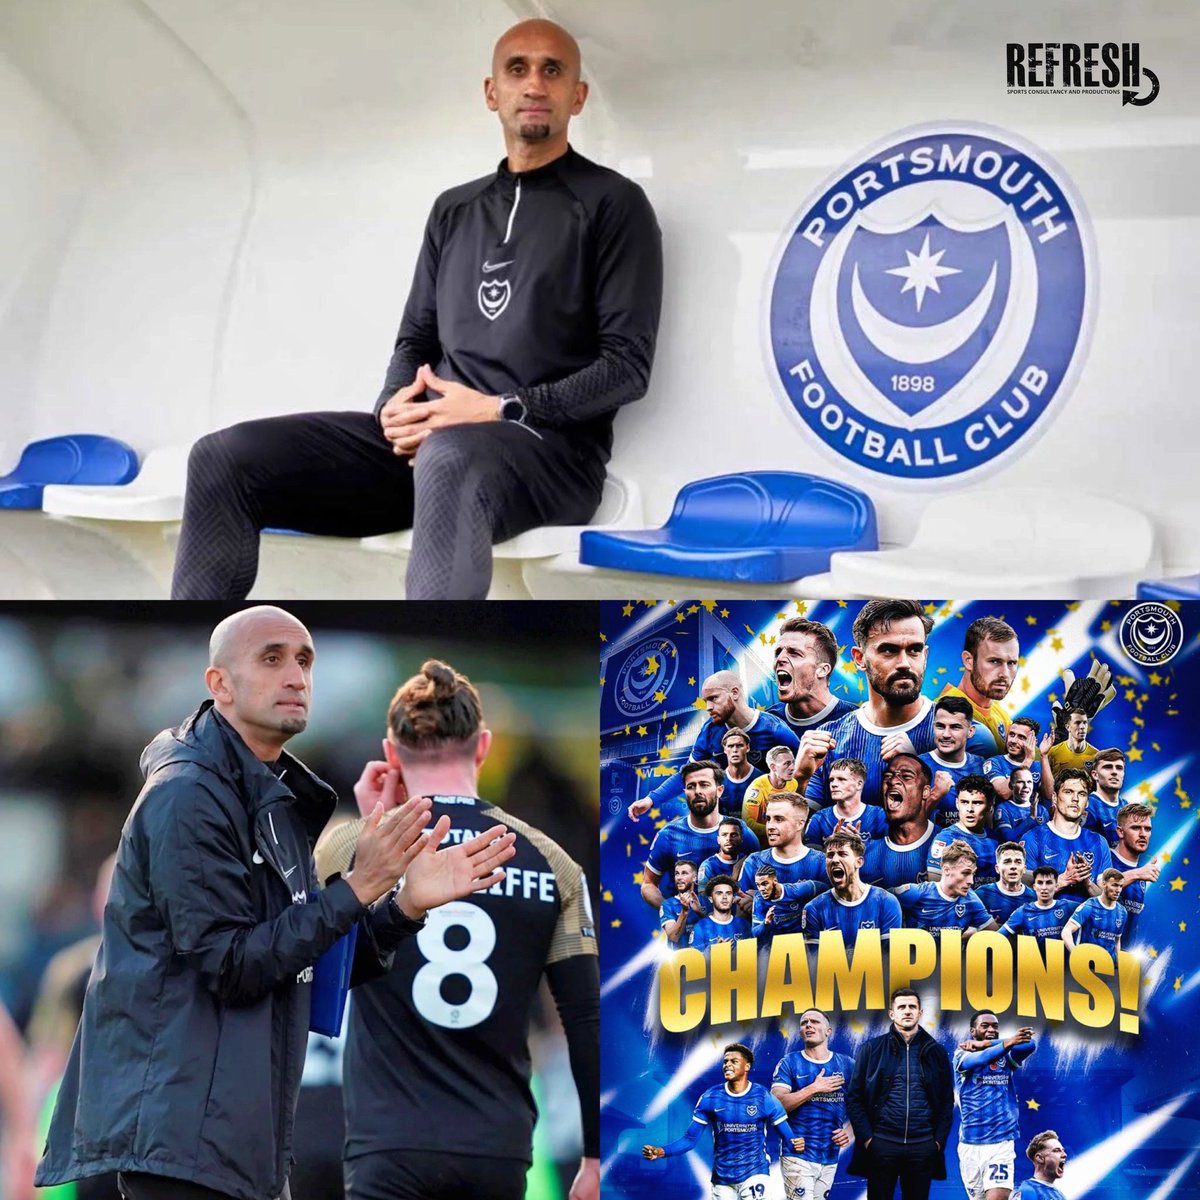 🤩 Congratulations @Zesh_Rehman for securing promotion with @Pompey to the Championship as League One Champions! 🏆